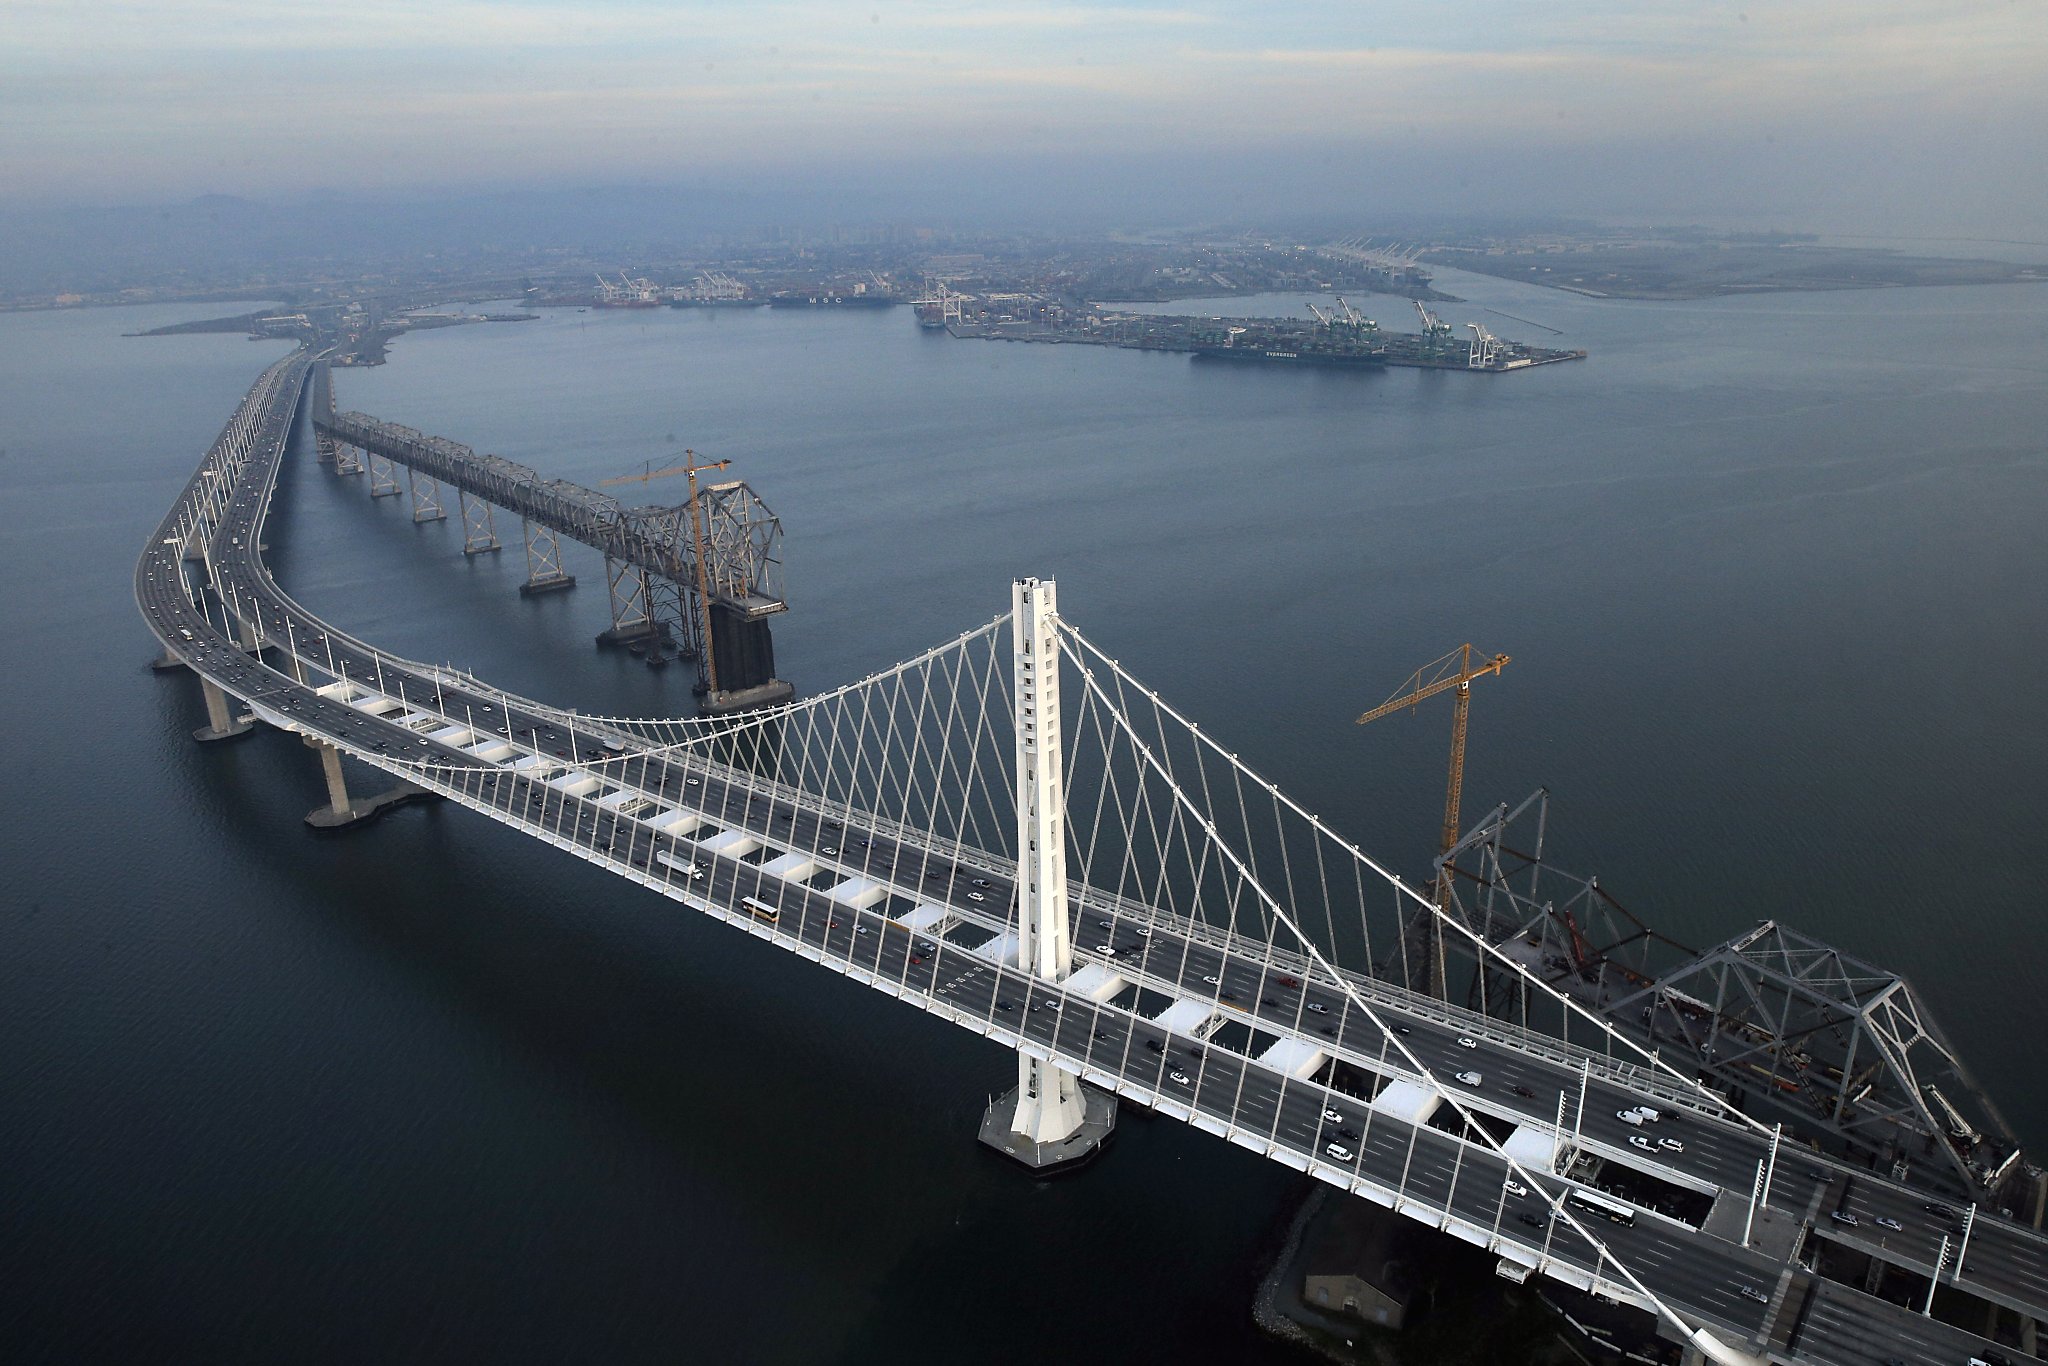 Discreet intelligence Stare Plague of problems puts Bay Bridge seismic safety in question